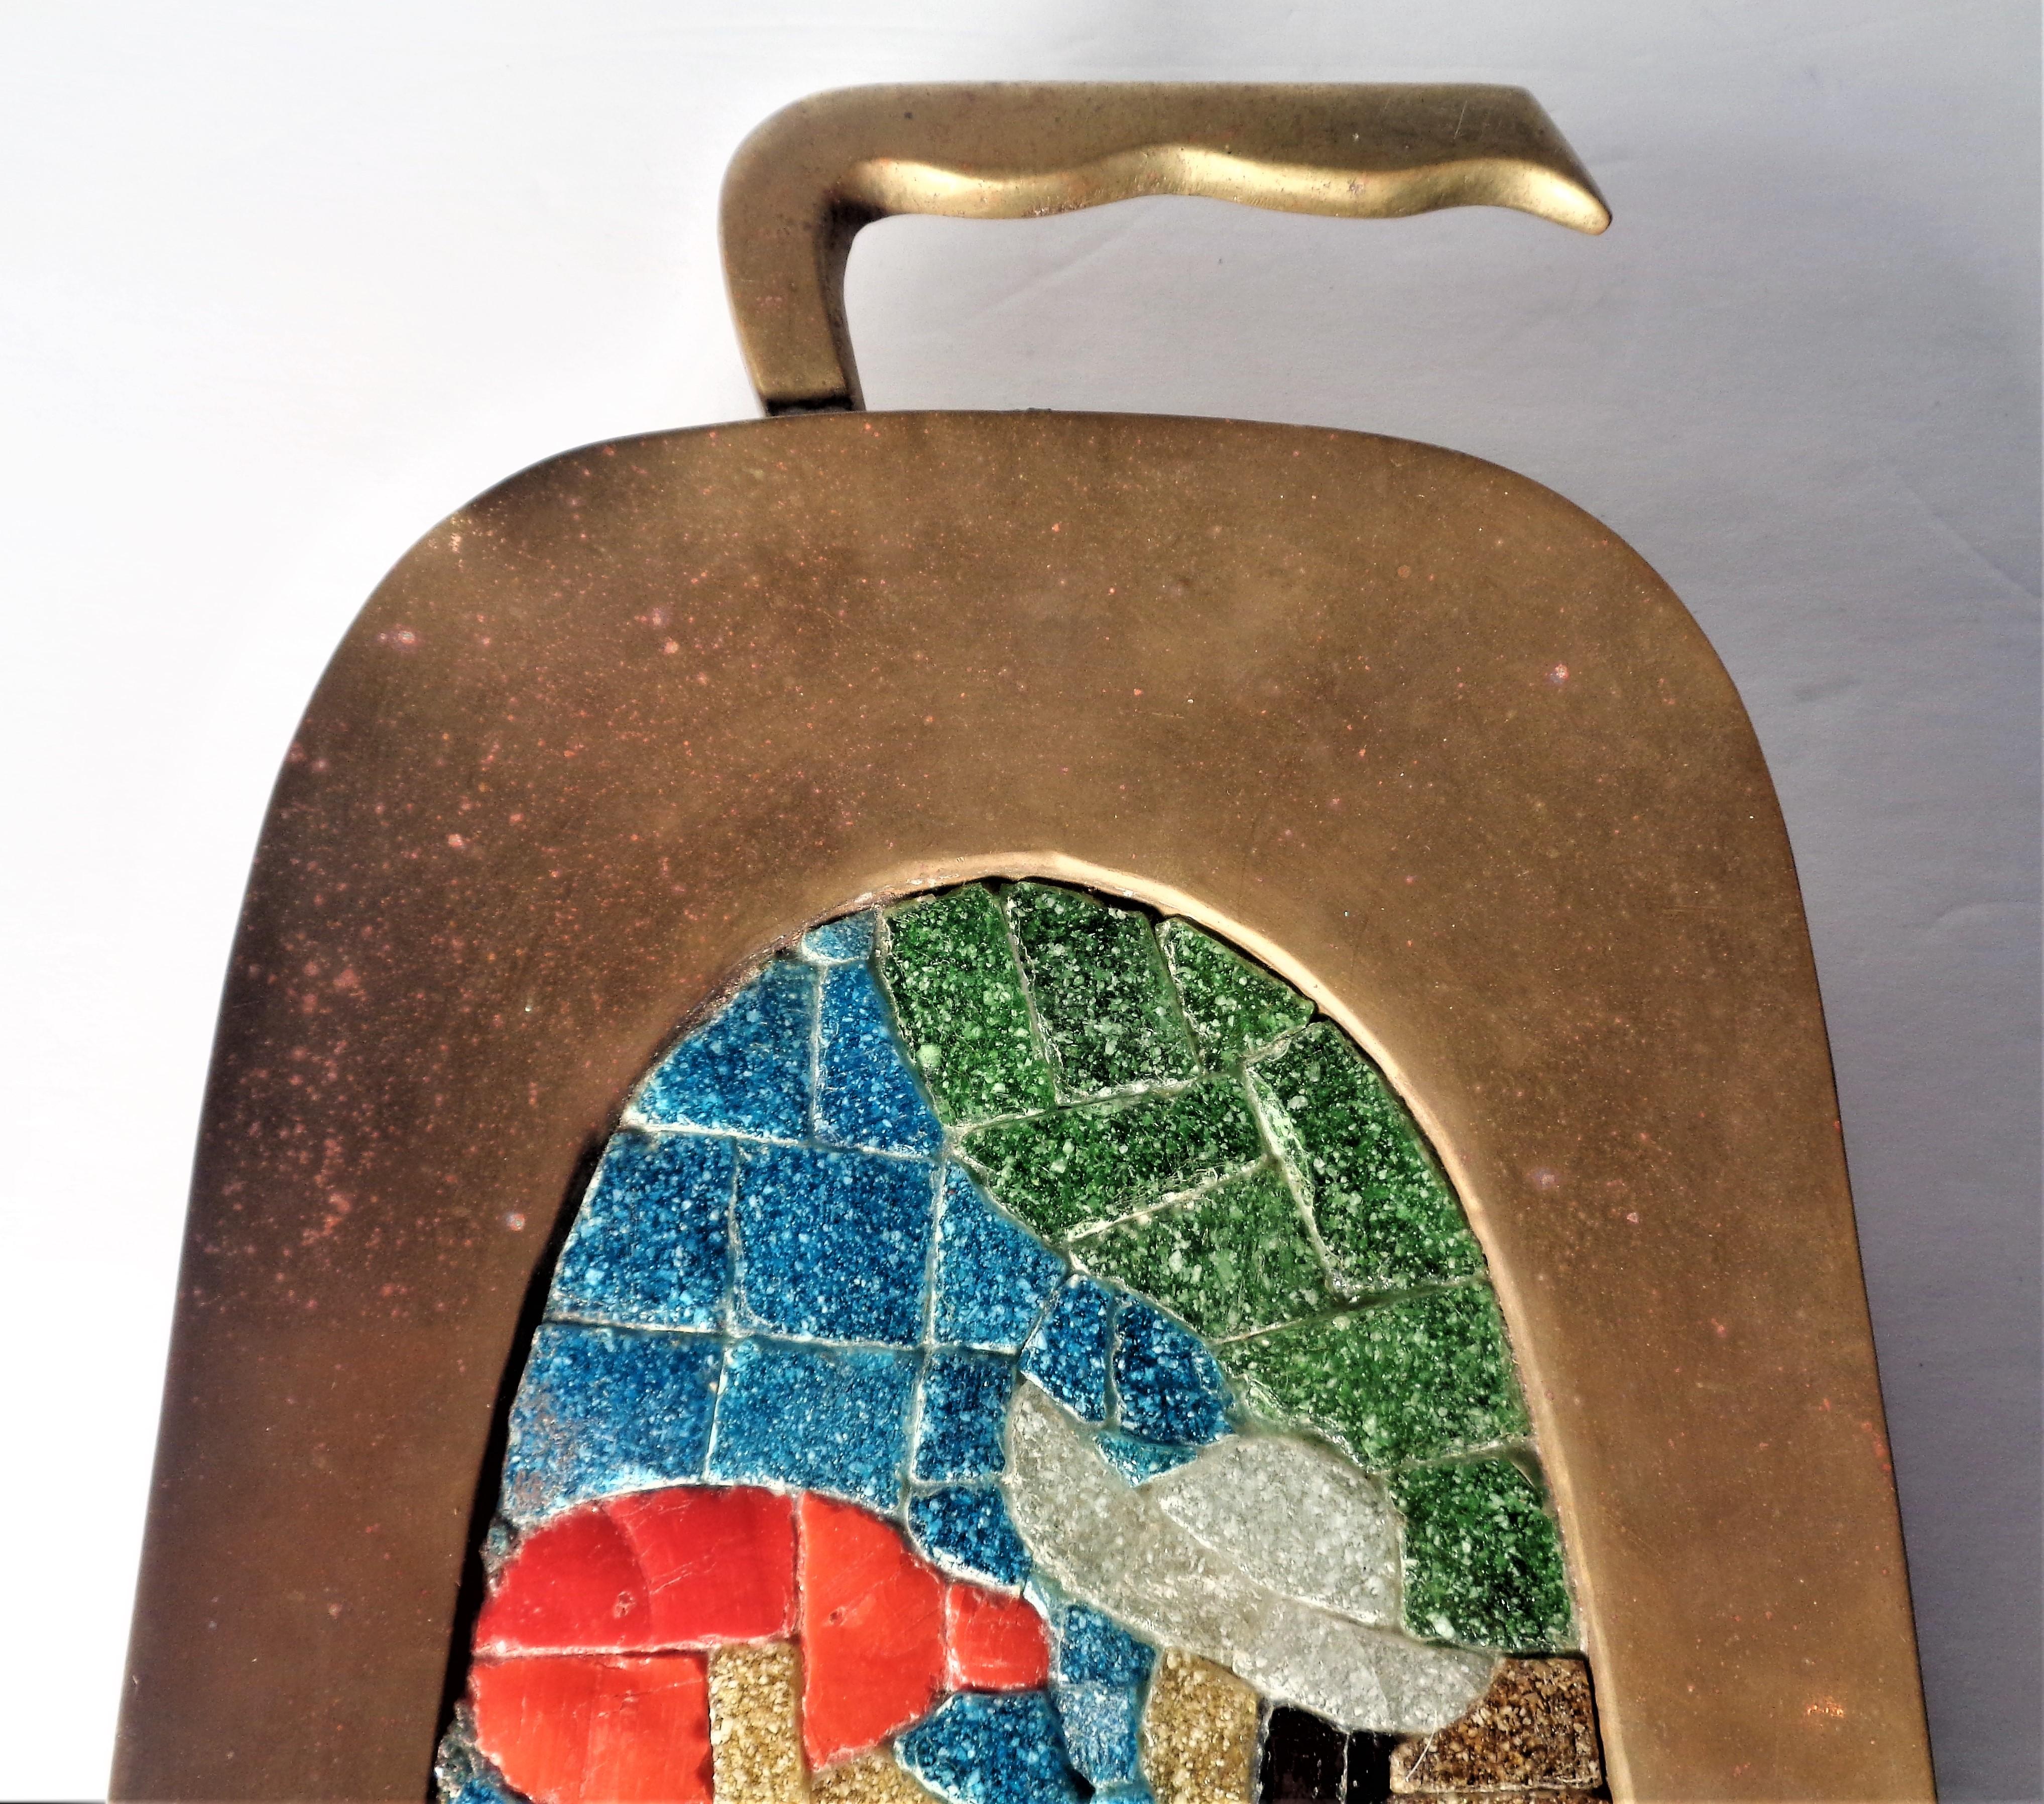 Mid-Century Modern Mexican Modernist Glass Mosaic and Brass Wall Plaque by Salvador Teran 1950's